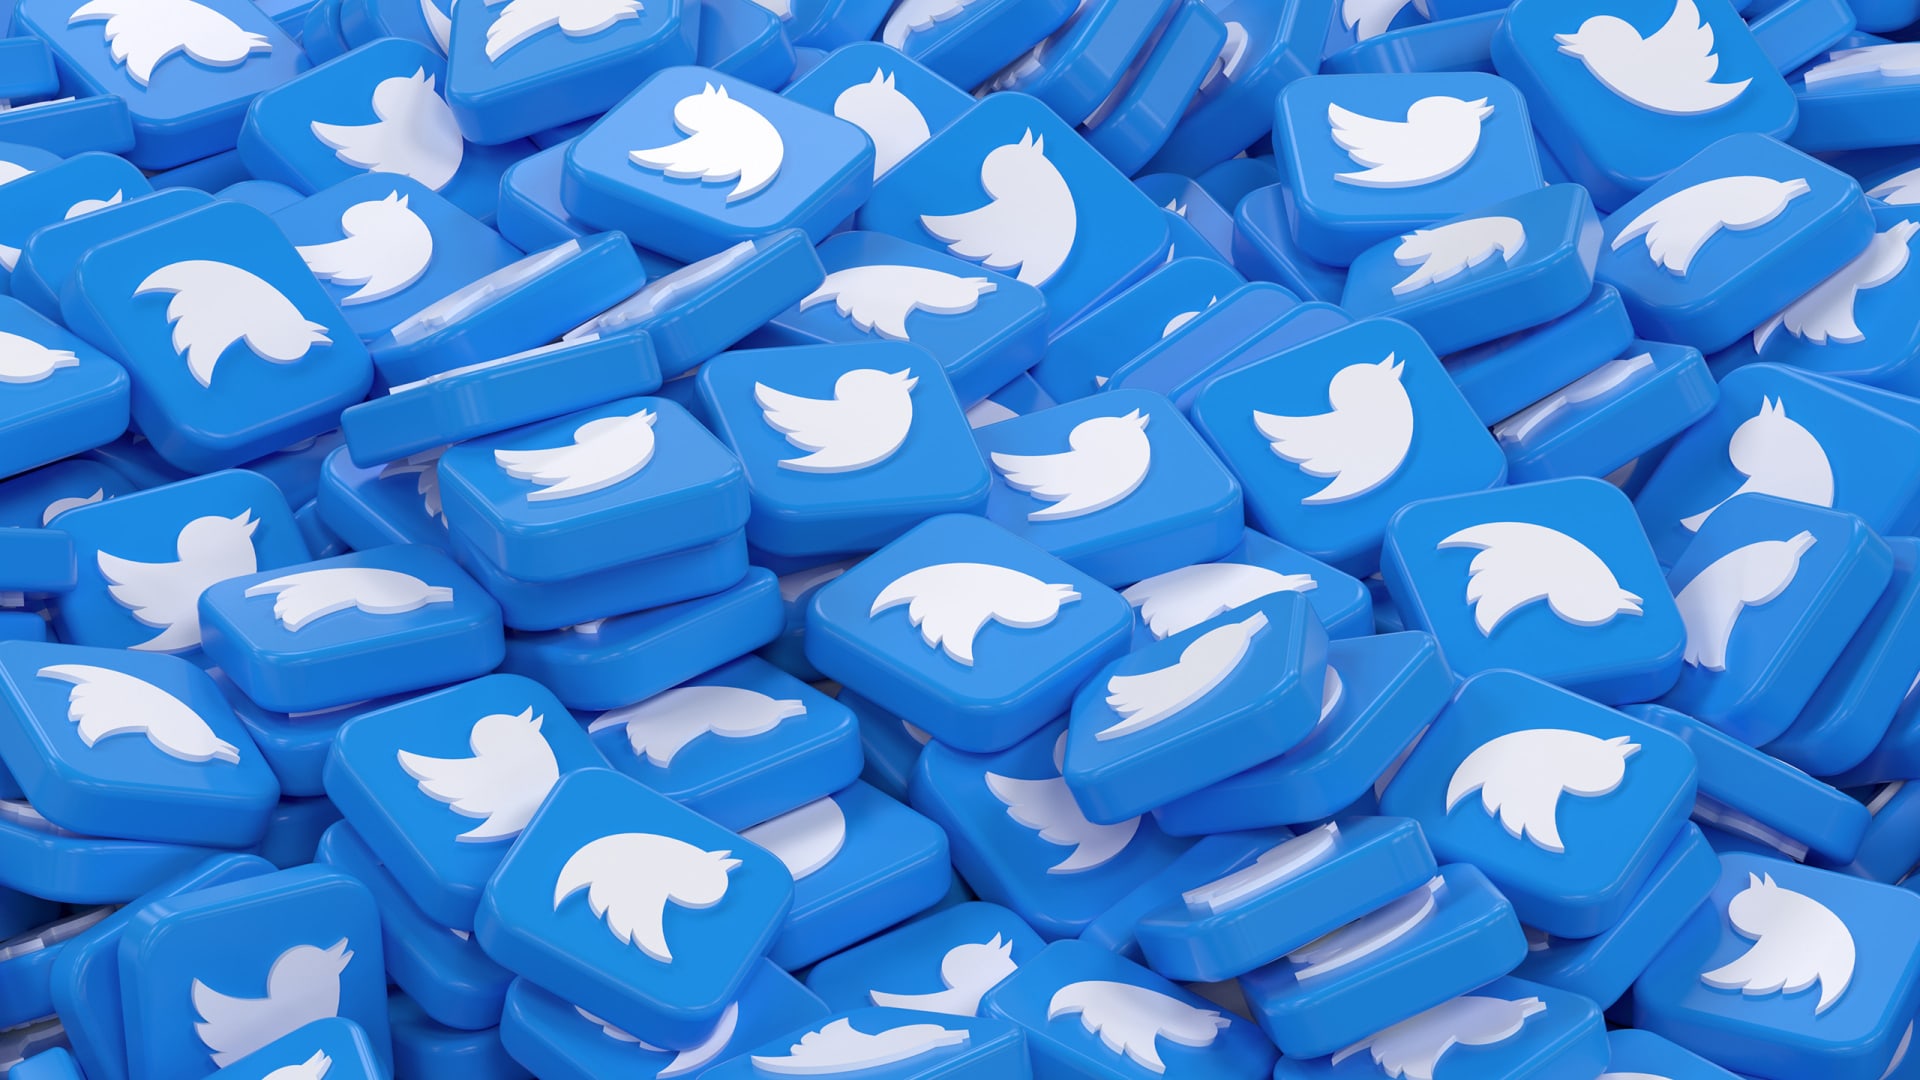 Twitter Blue is launching again today as some ‘legacy’ checks display vague messages